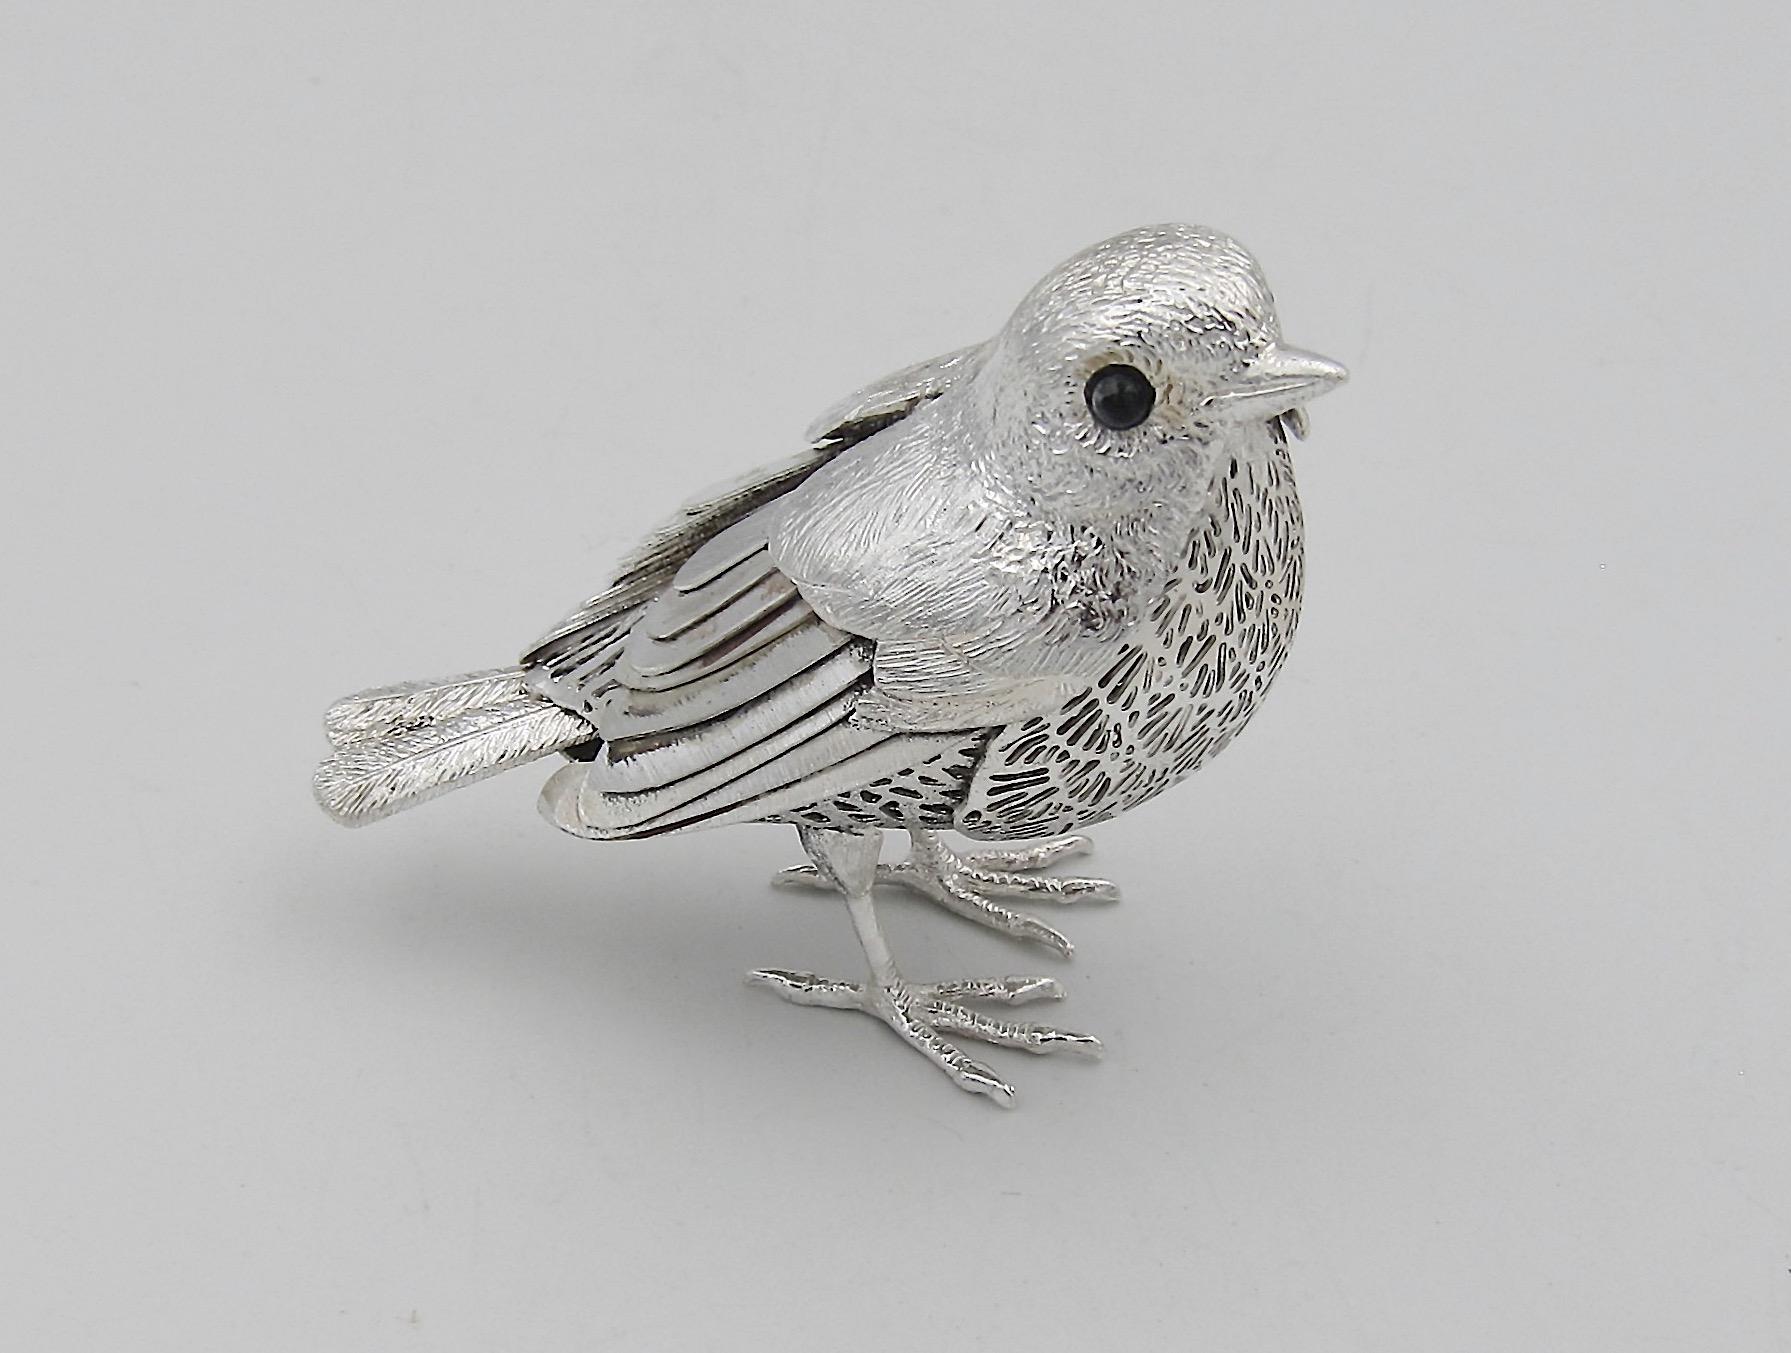 A vintage silver-plated bird figurine from the Christofle of Paris Lumière d'Argent or Silver Light Collection. The bird is likely a robin with a delicate openwork body of silver metal, textured feathers, and inset eyes of black onyx. The bird bears